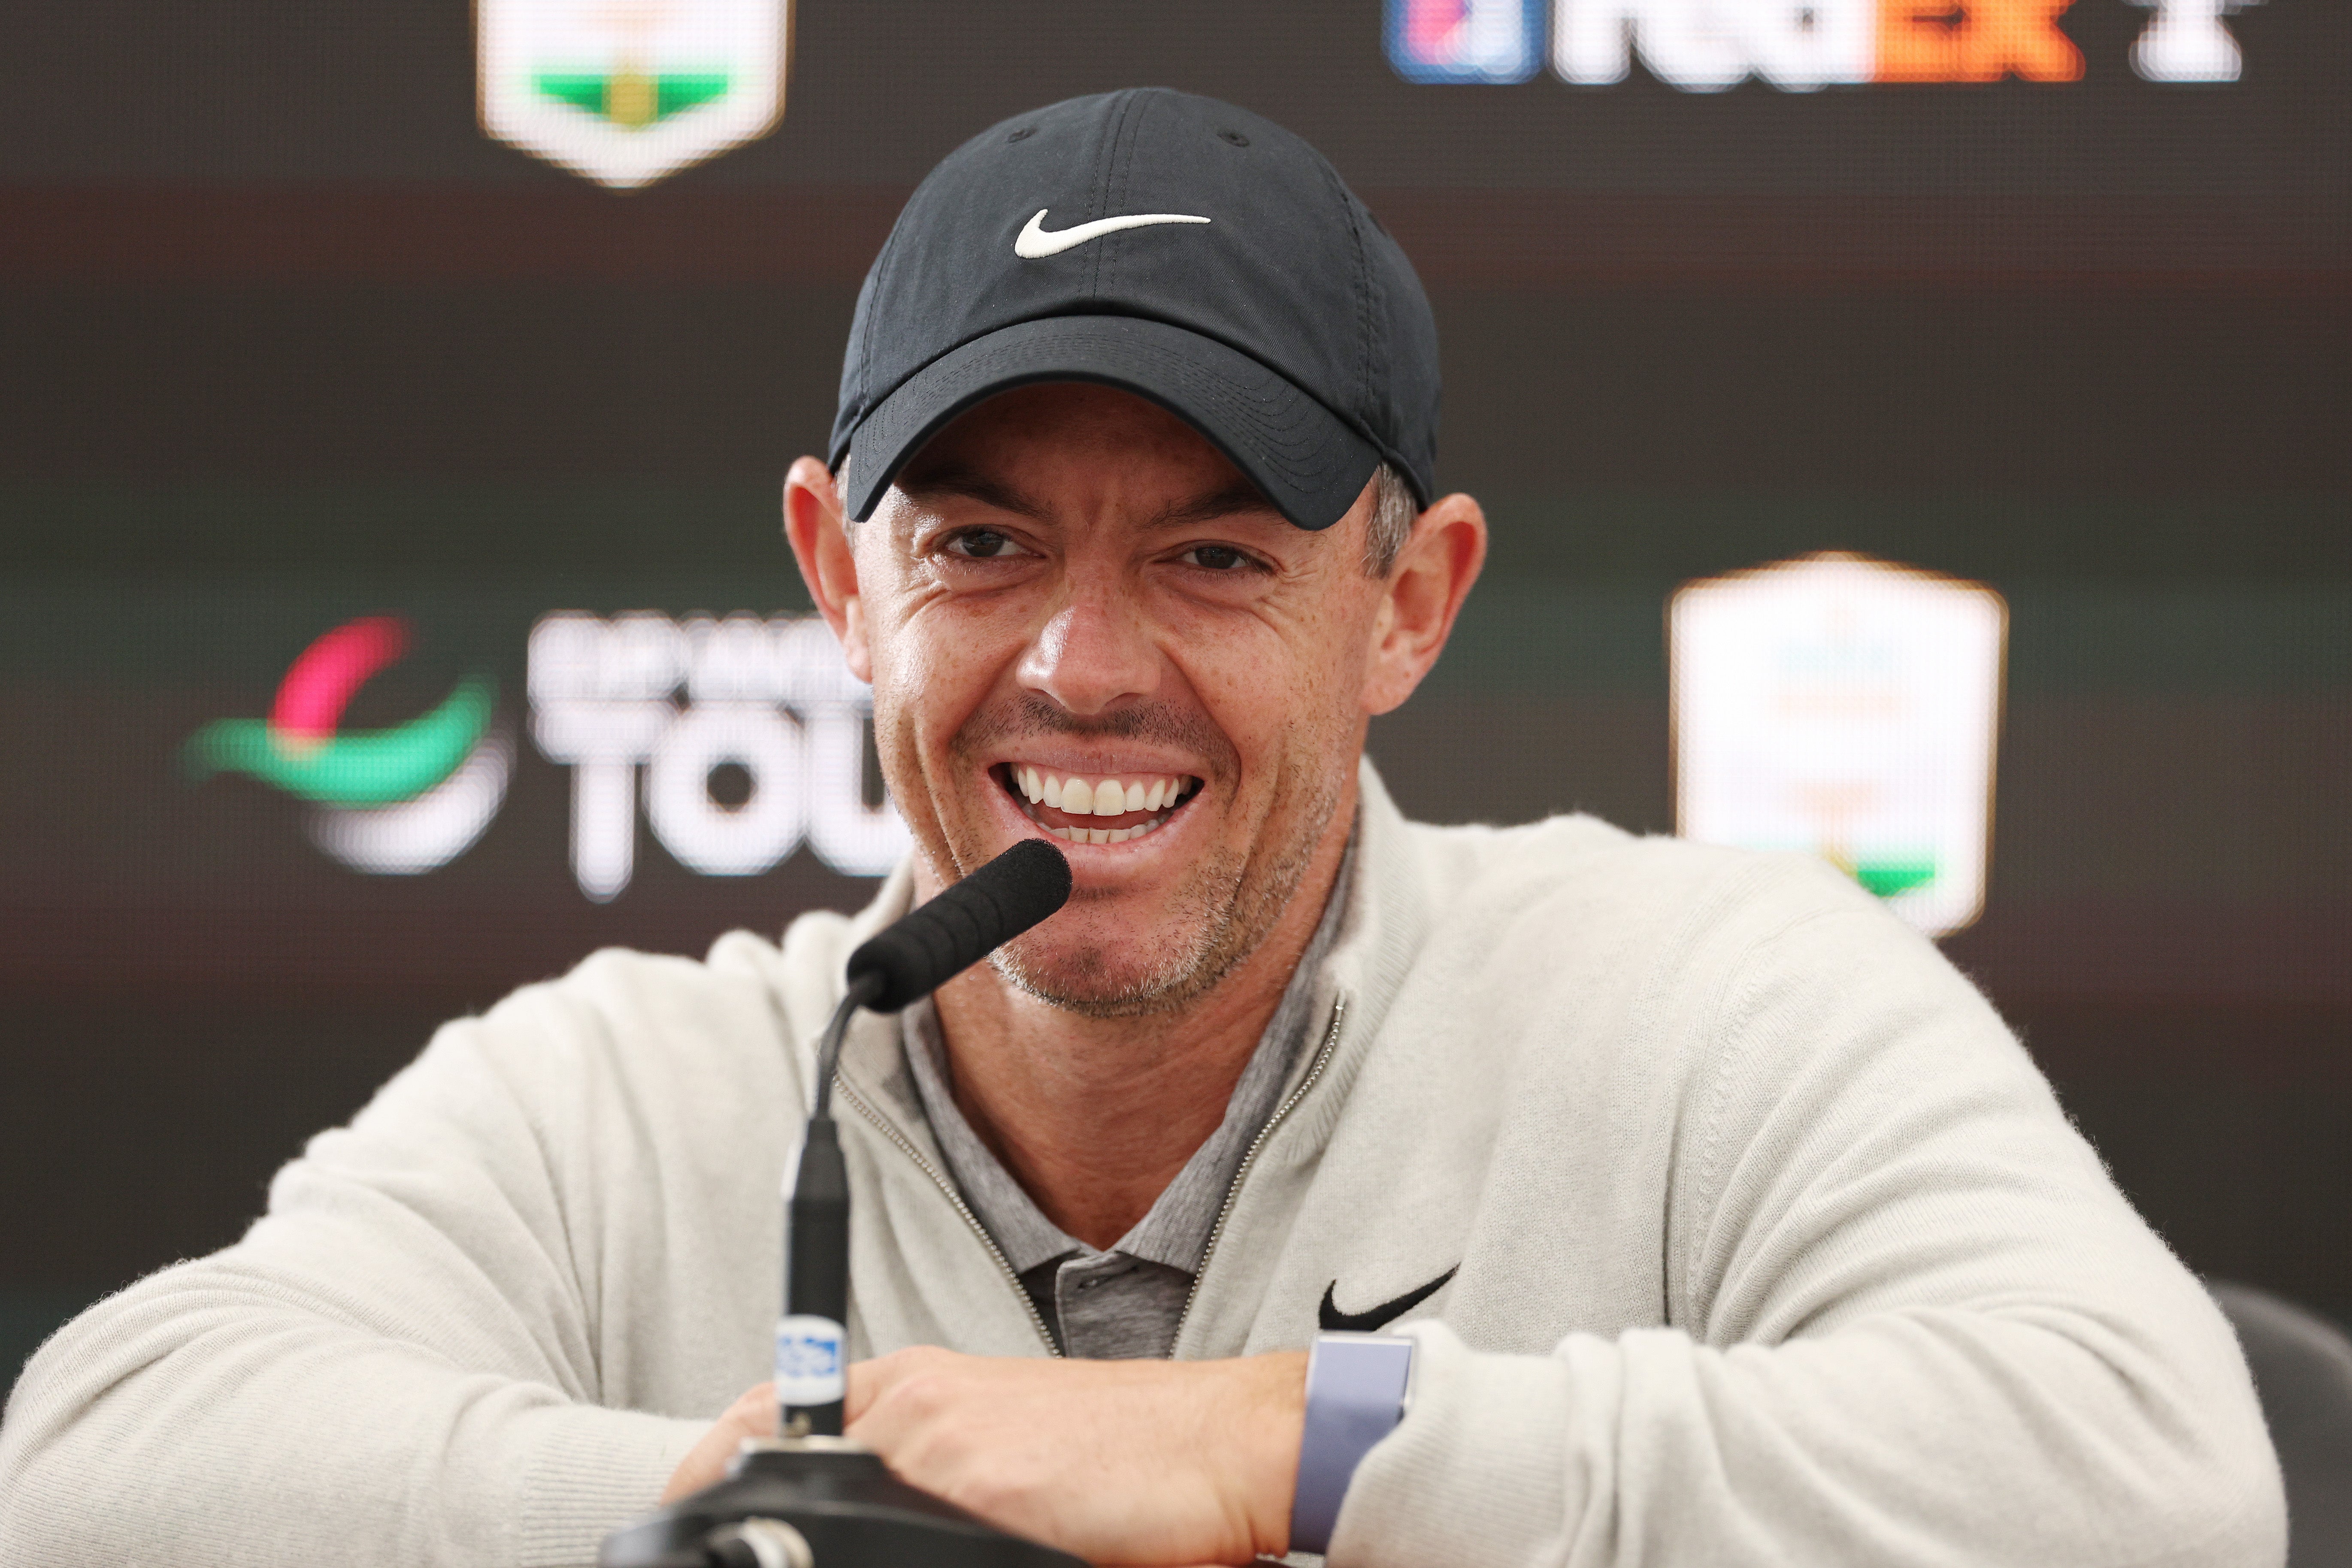 Rory McIlroy has spoken for the first time since the US Open